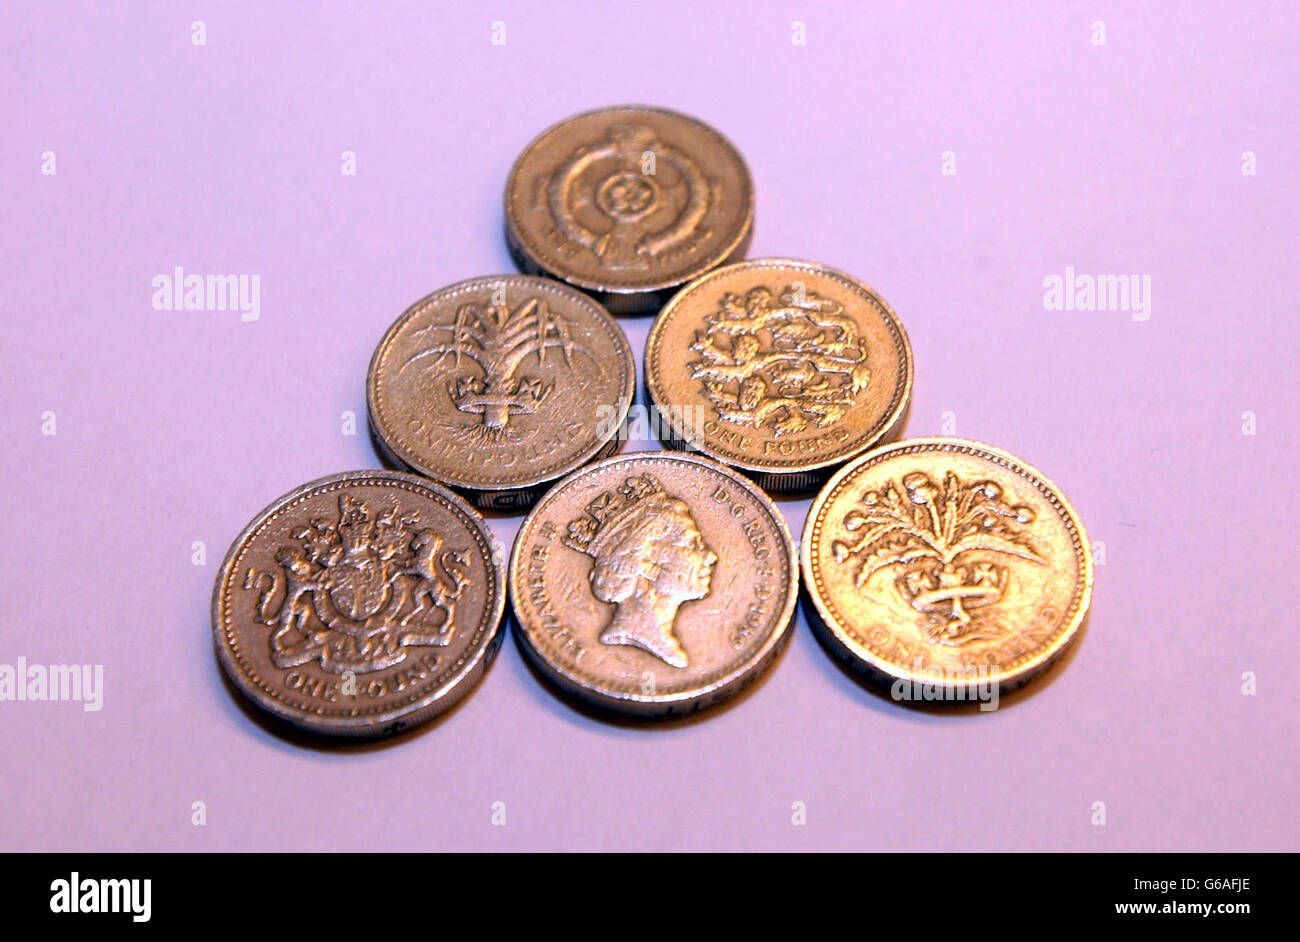 UK Currency, 1 coins. Stock picture of English One Pound Coins. Stock Photo